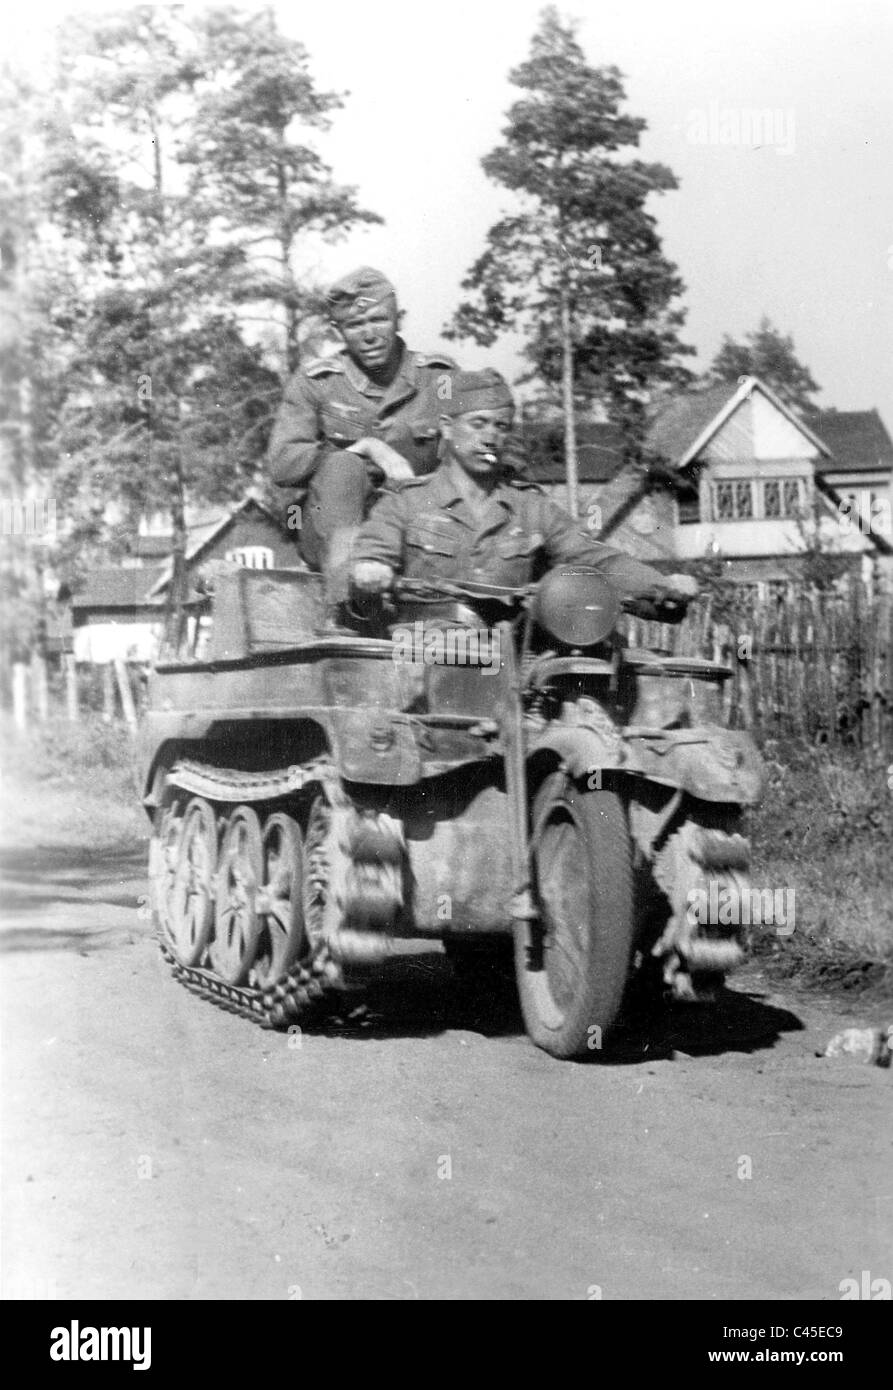 Kettenkrad (half-track motorcycle) in Russia Stock Photo